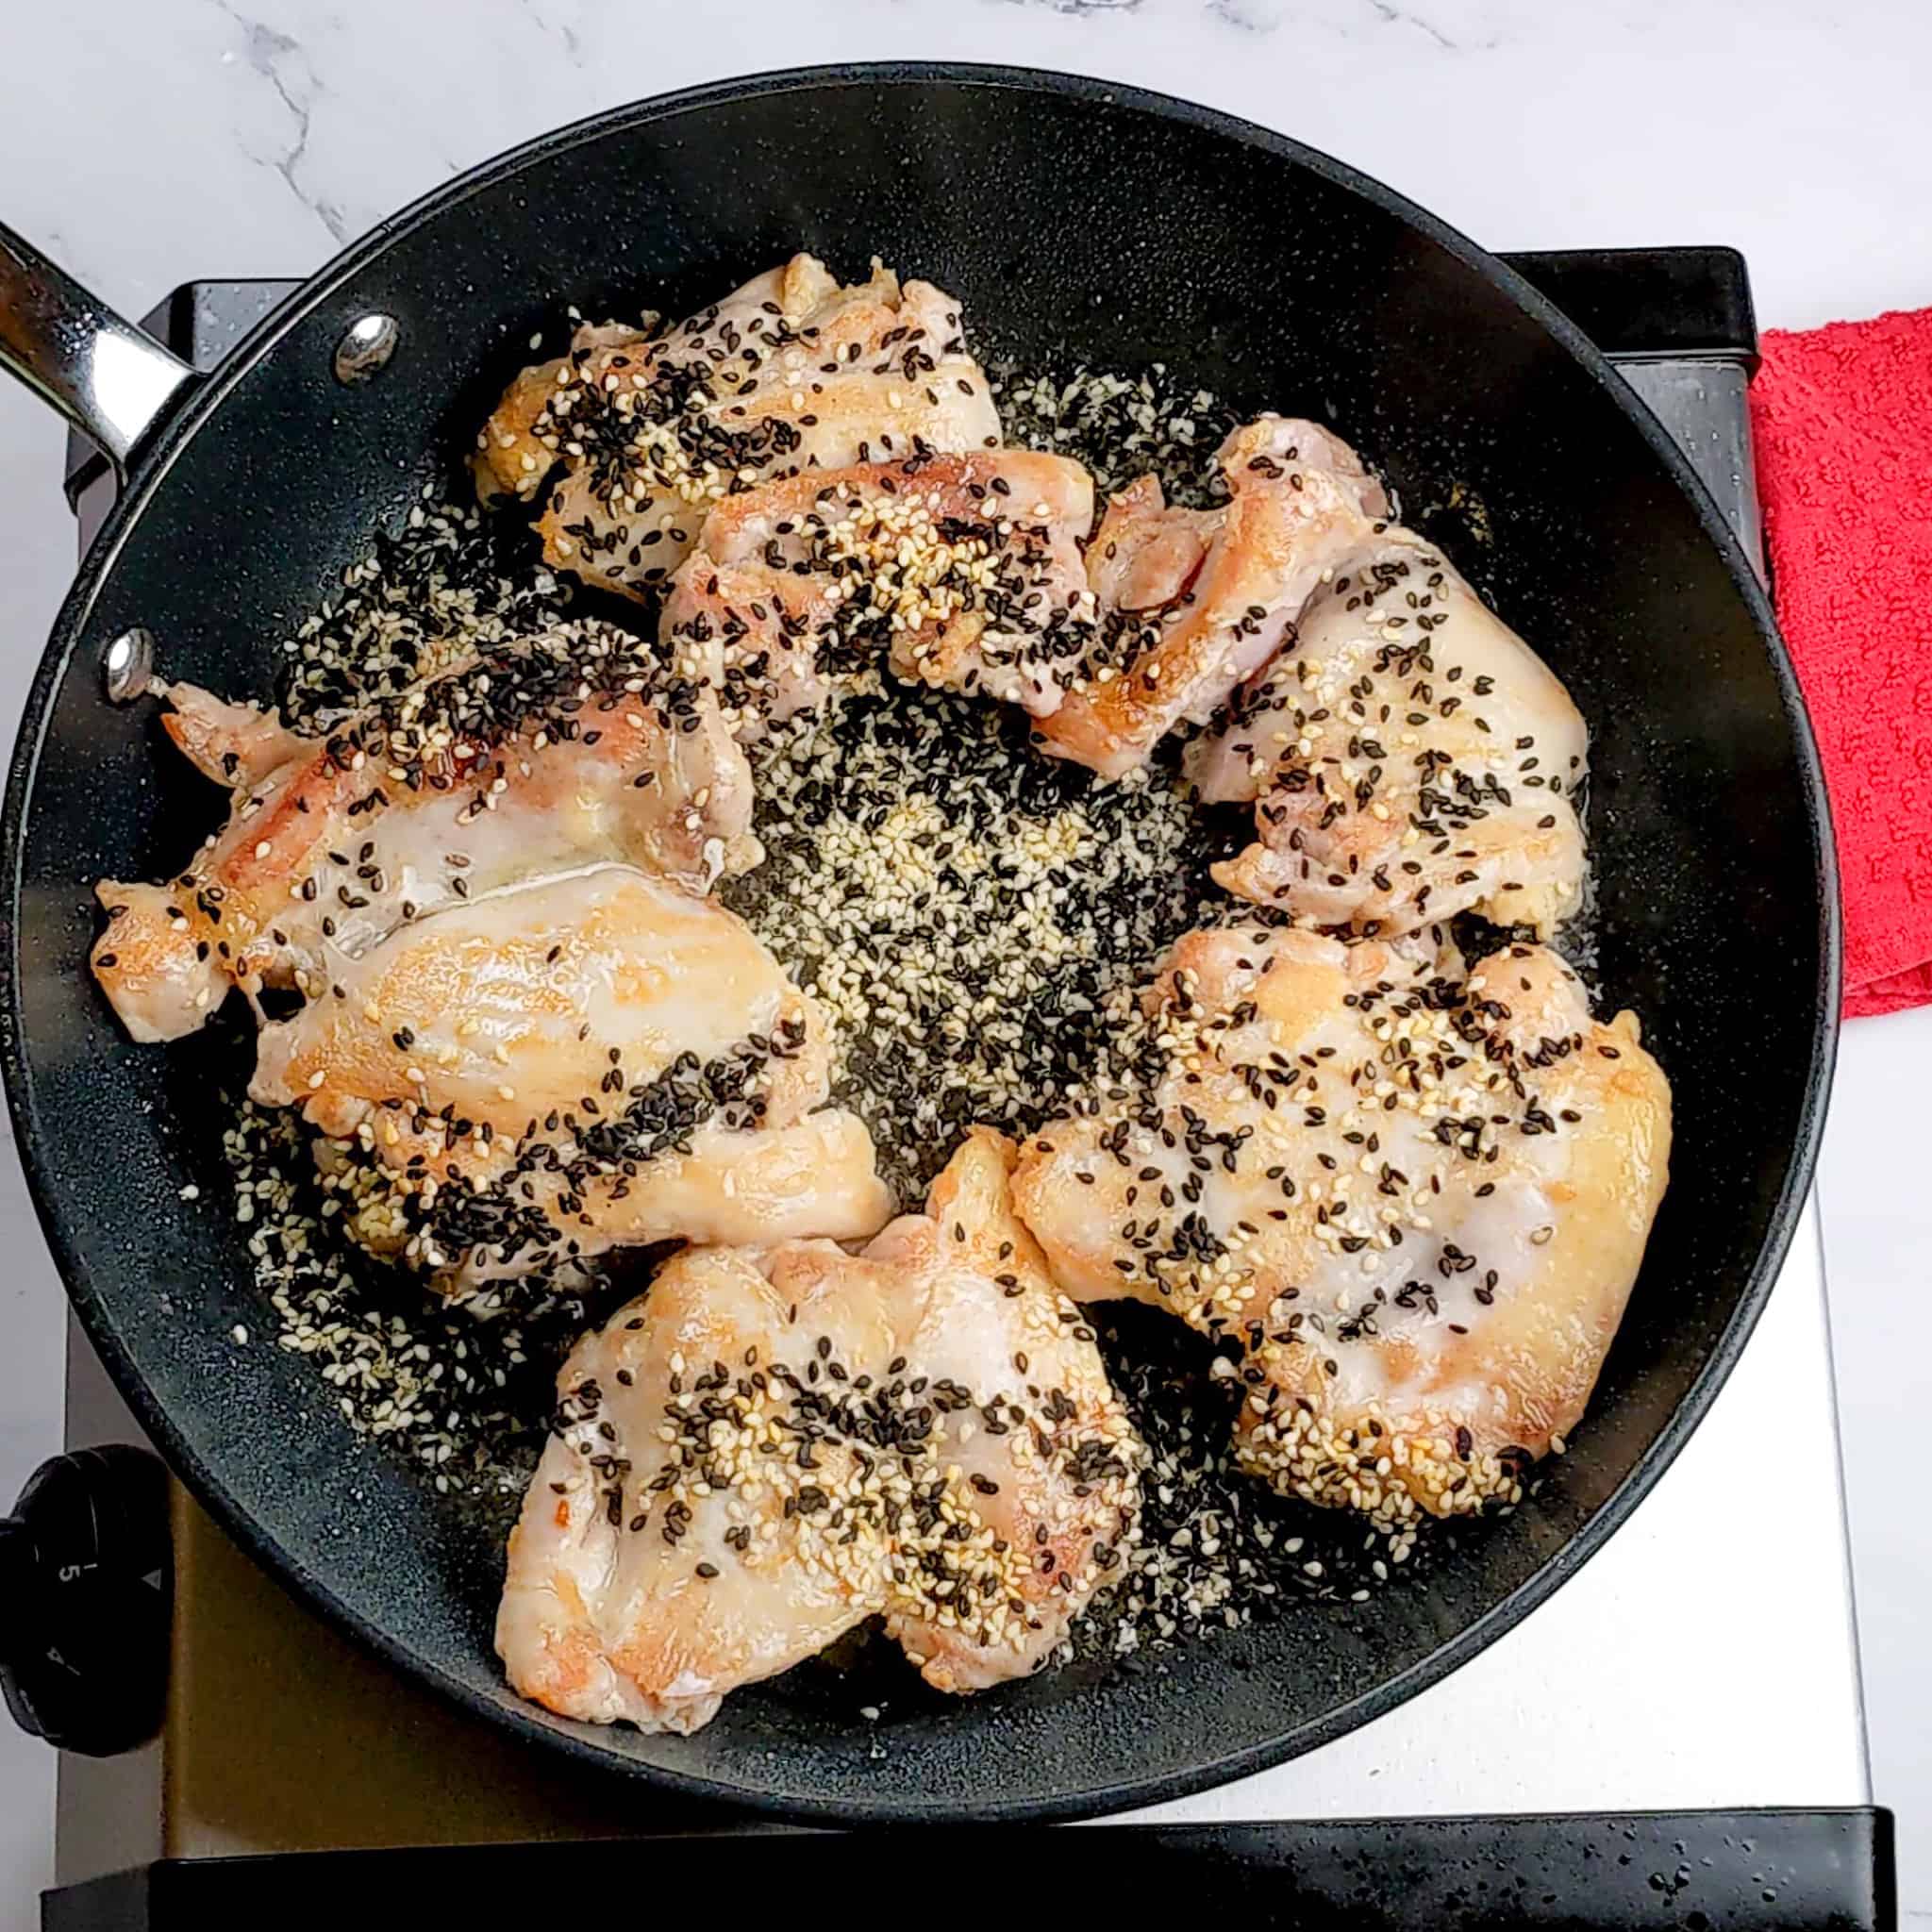 seared chicken breast with black and white sesame seeds in a non-stick frying pan